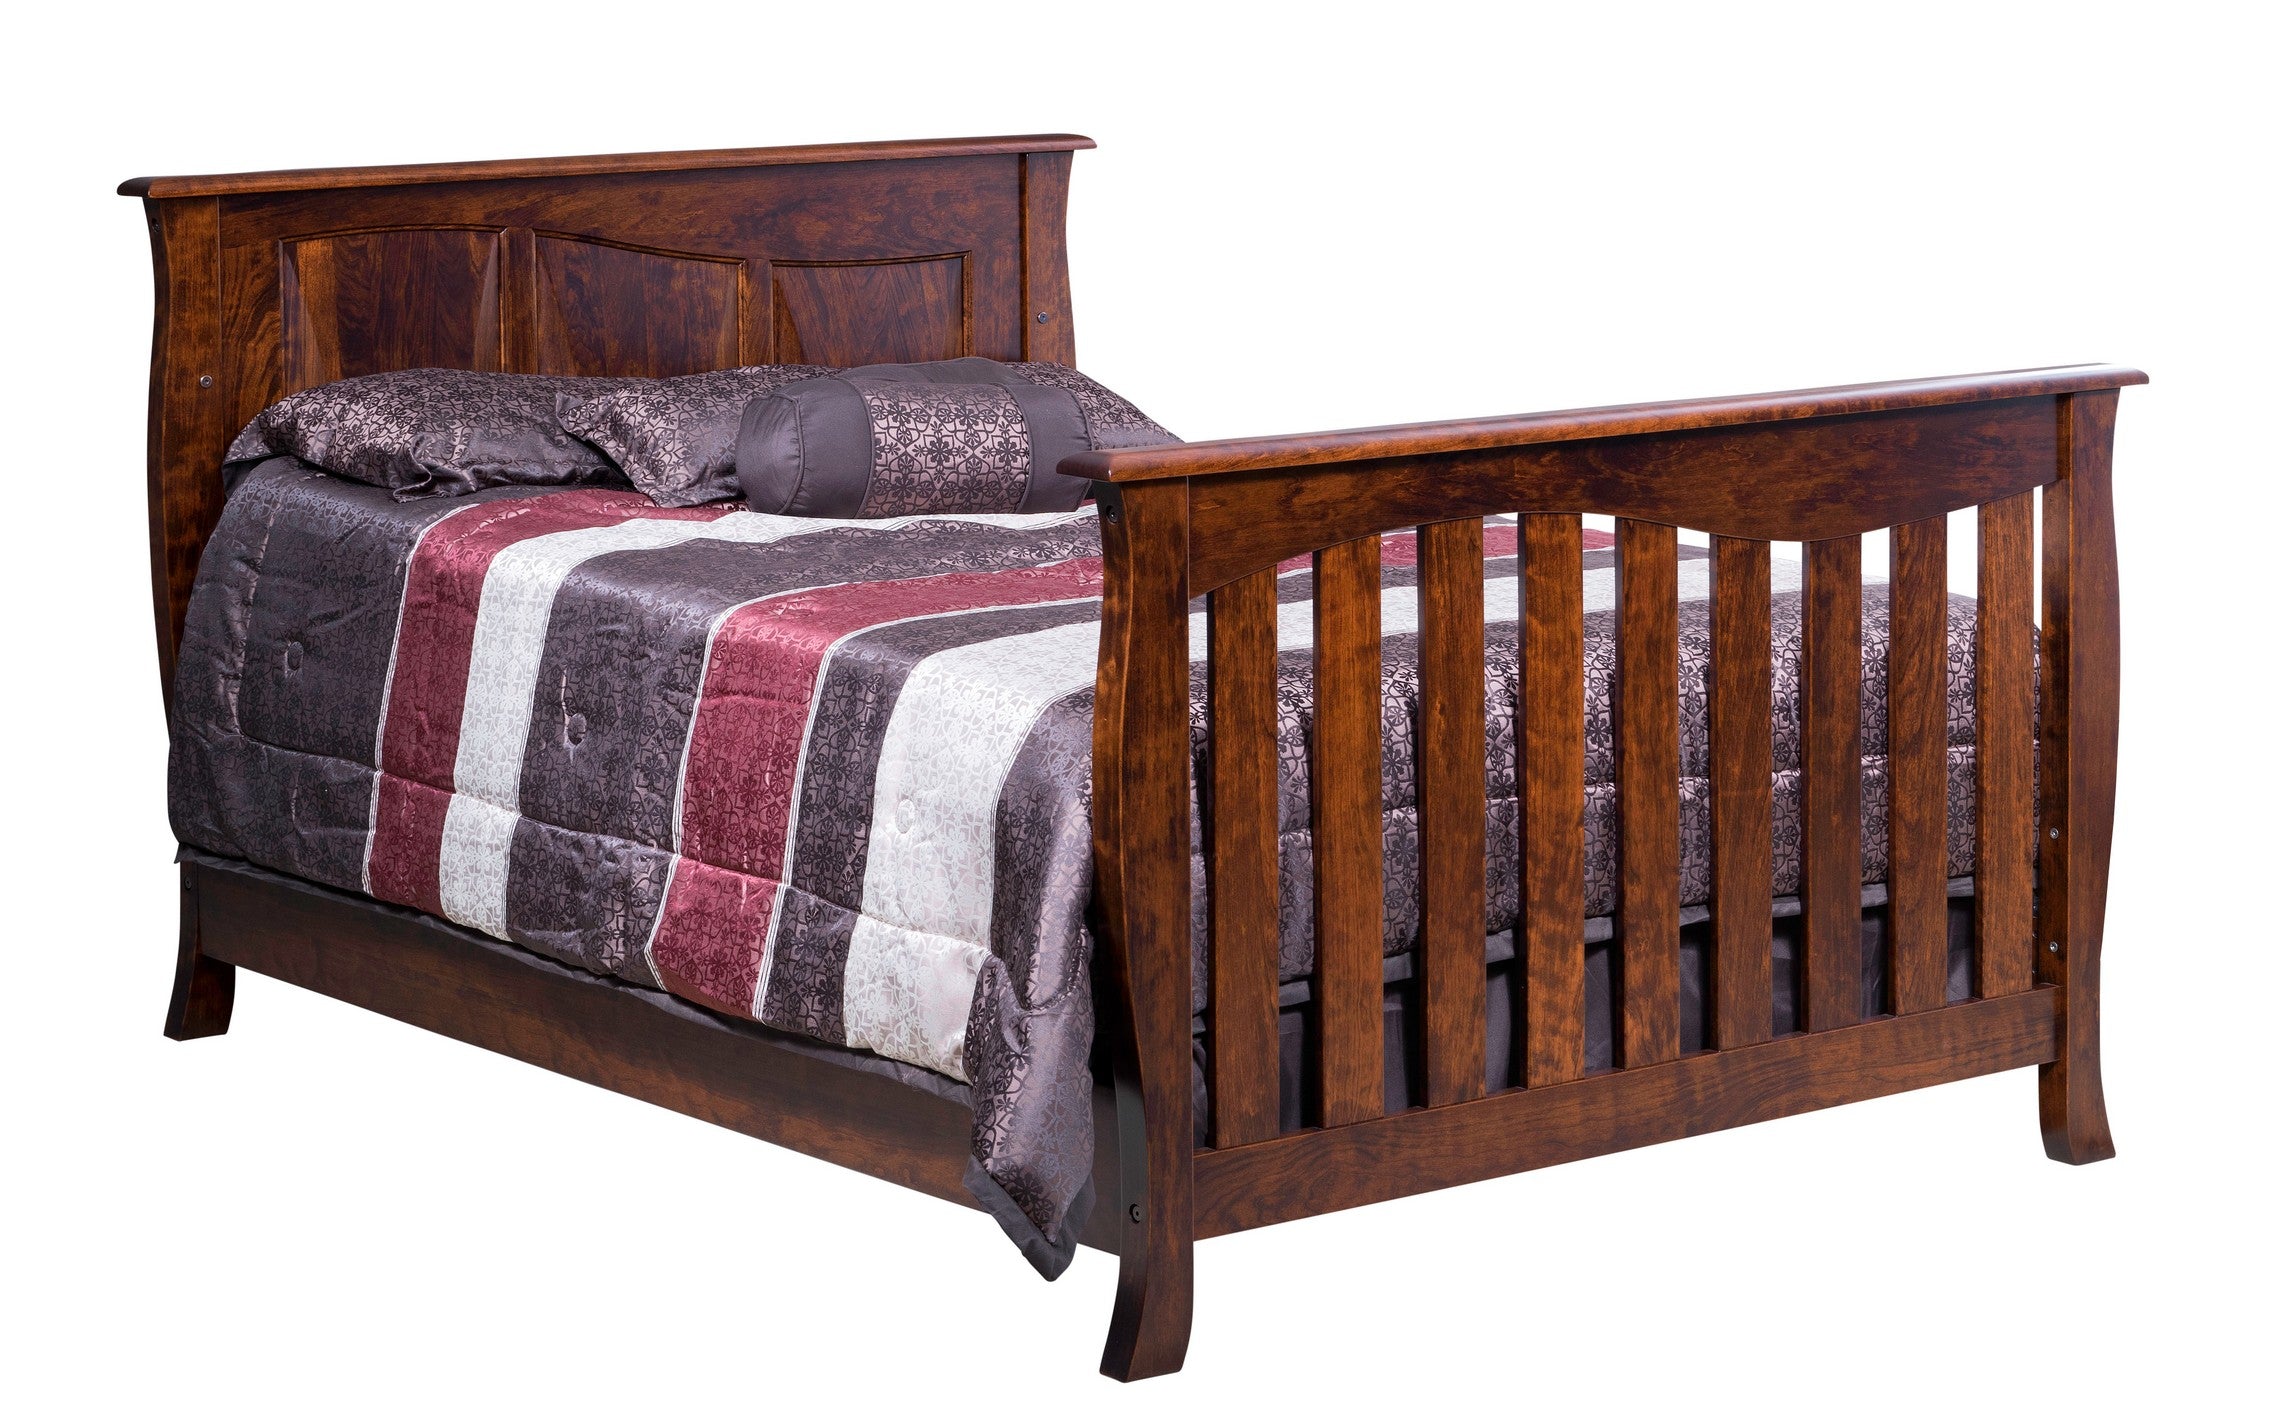 cayman double bed in sap cherry wood with burnt umber stain